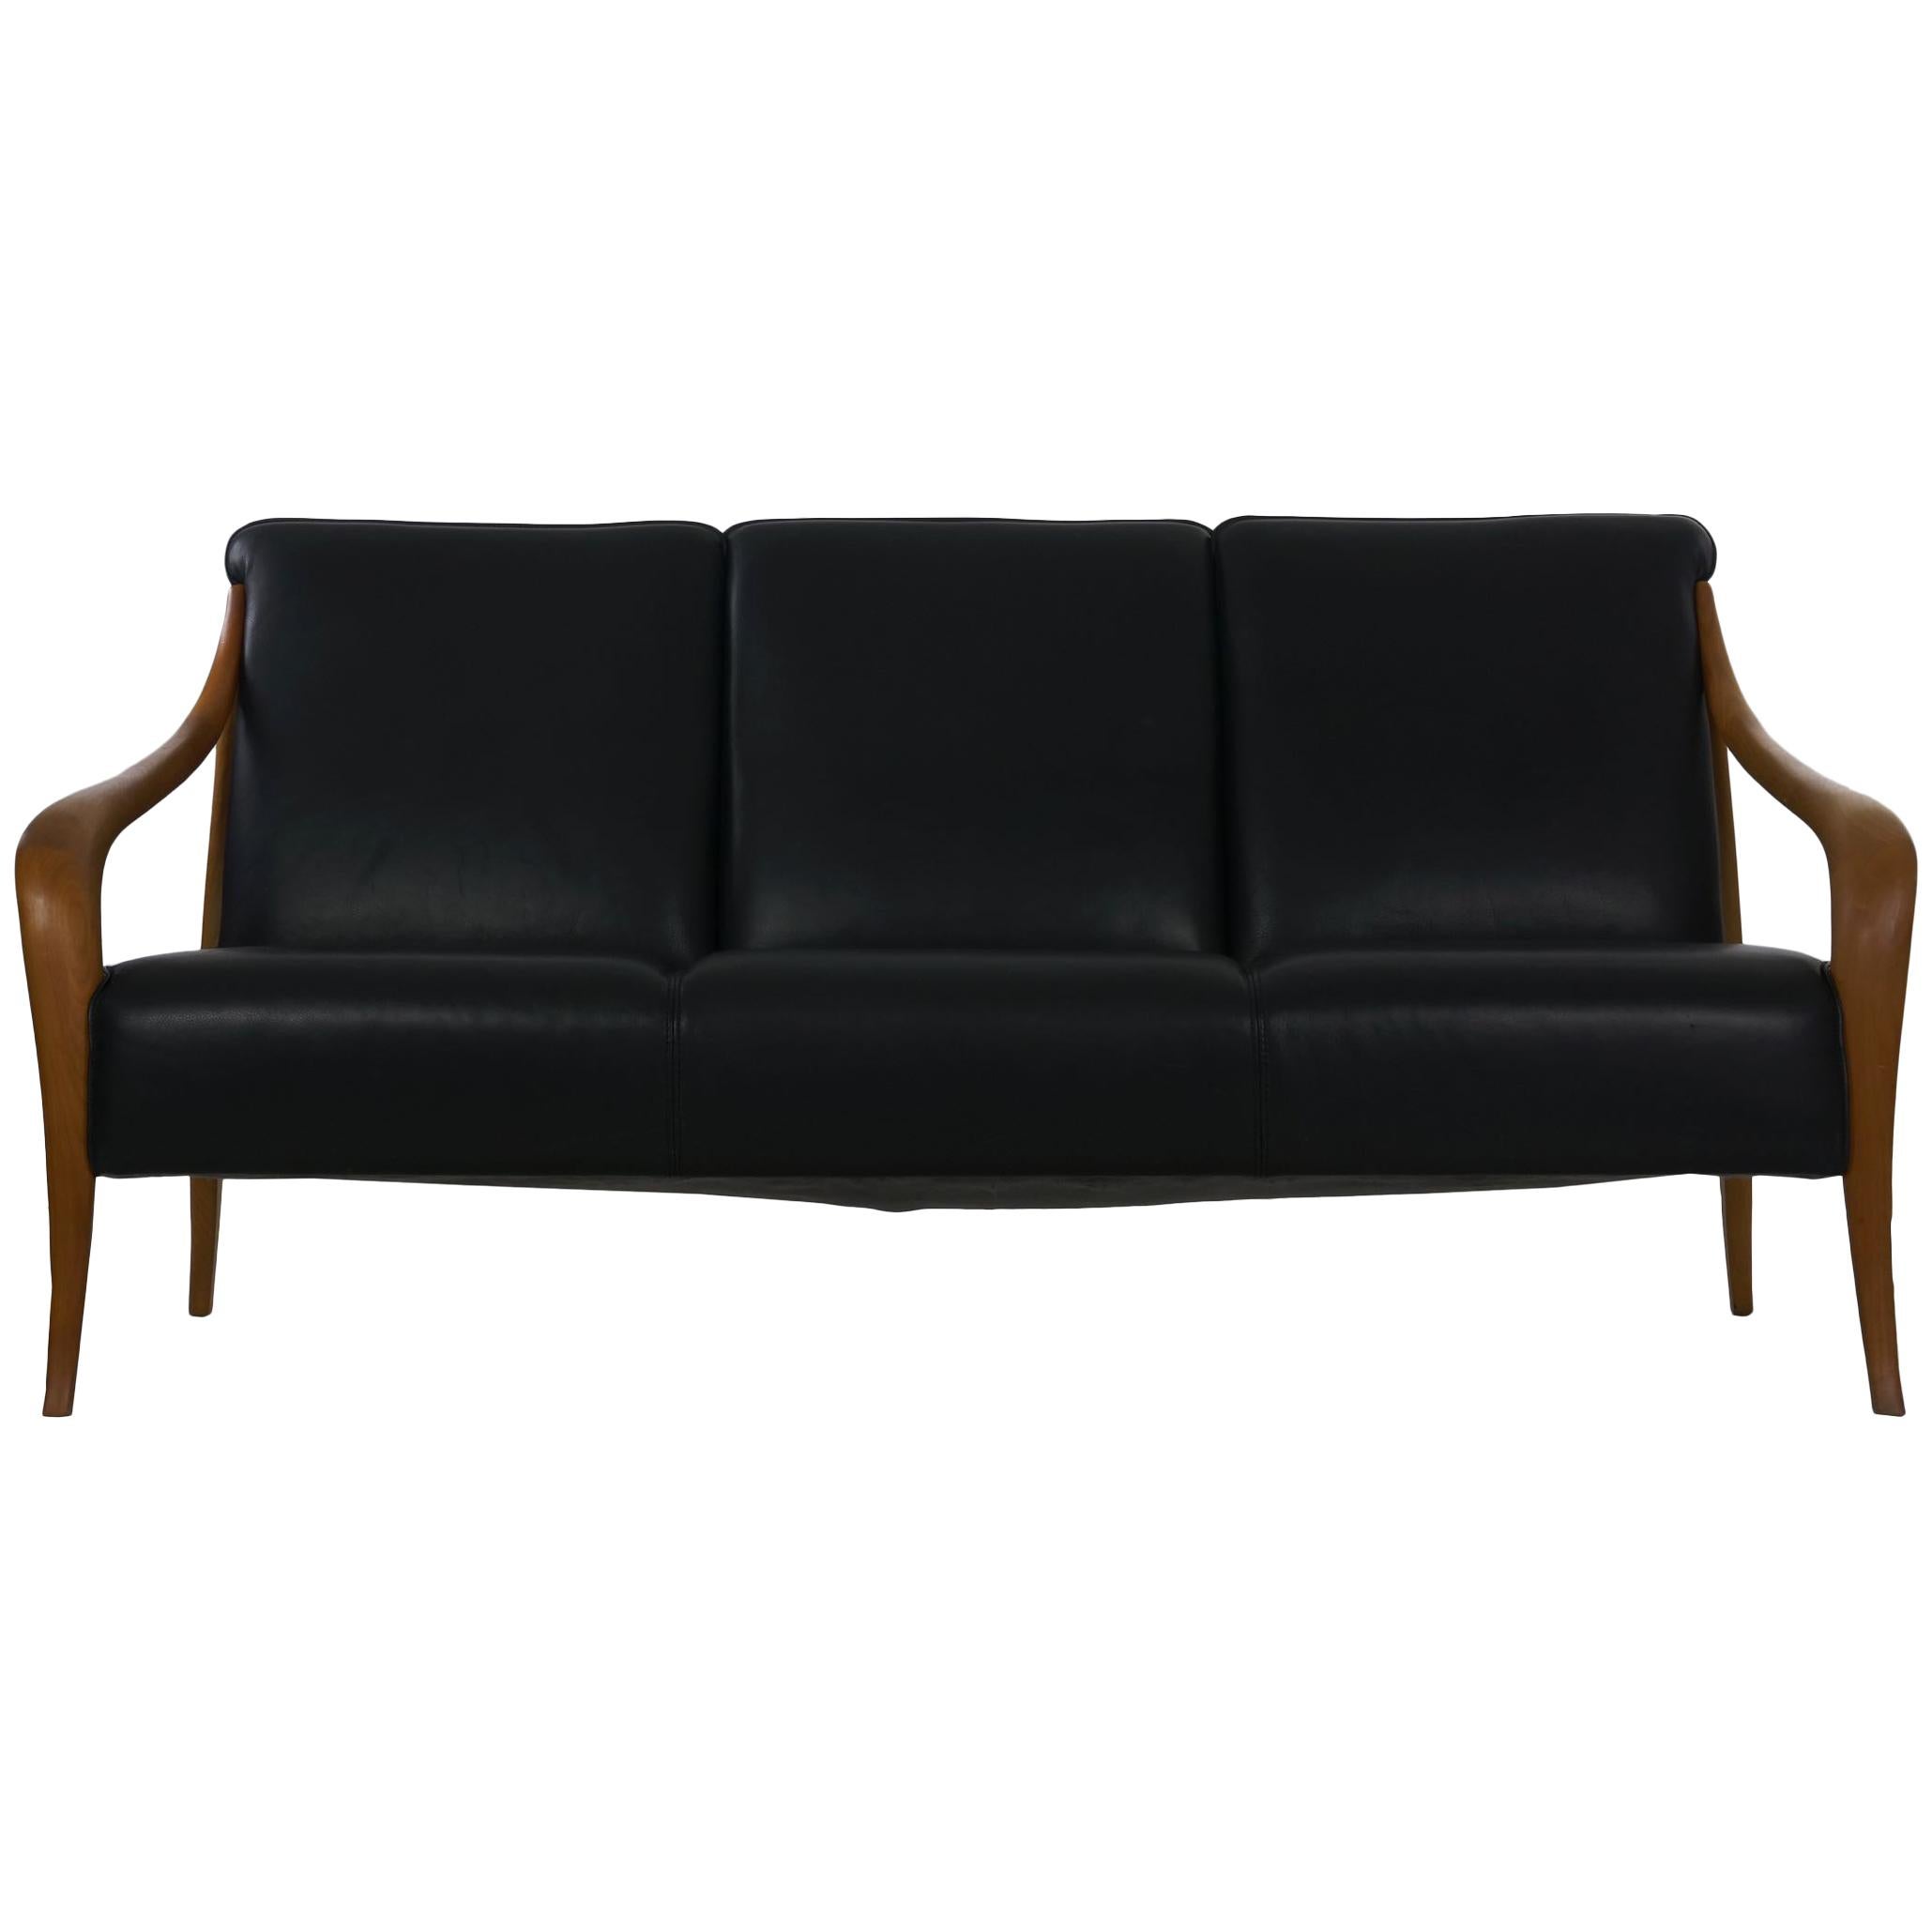 Danish Mid-Century Modern Style Sculpted Teak Black Leather Sofa by Wagner